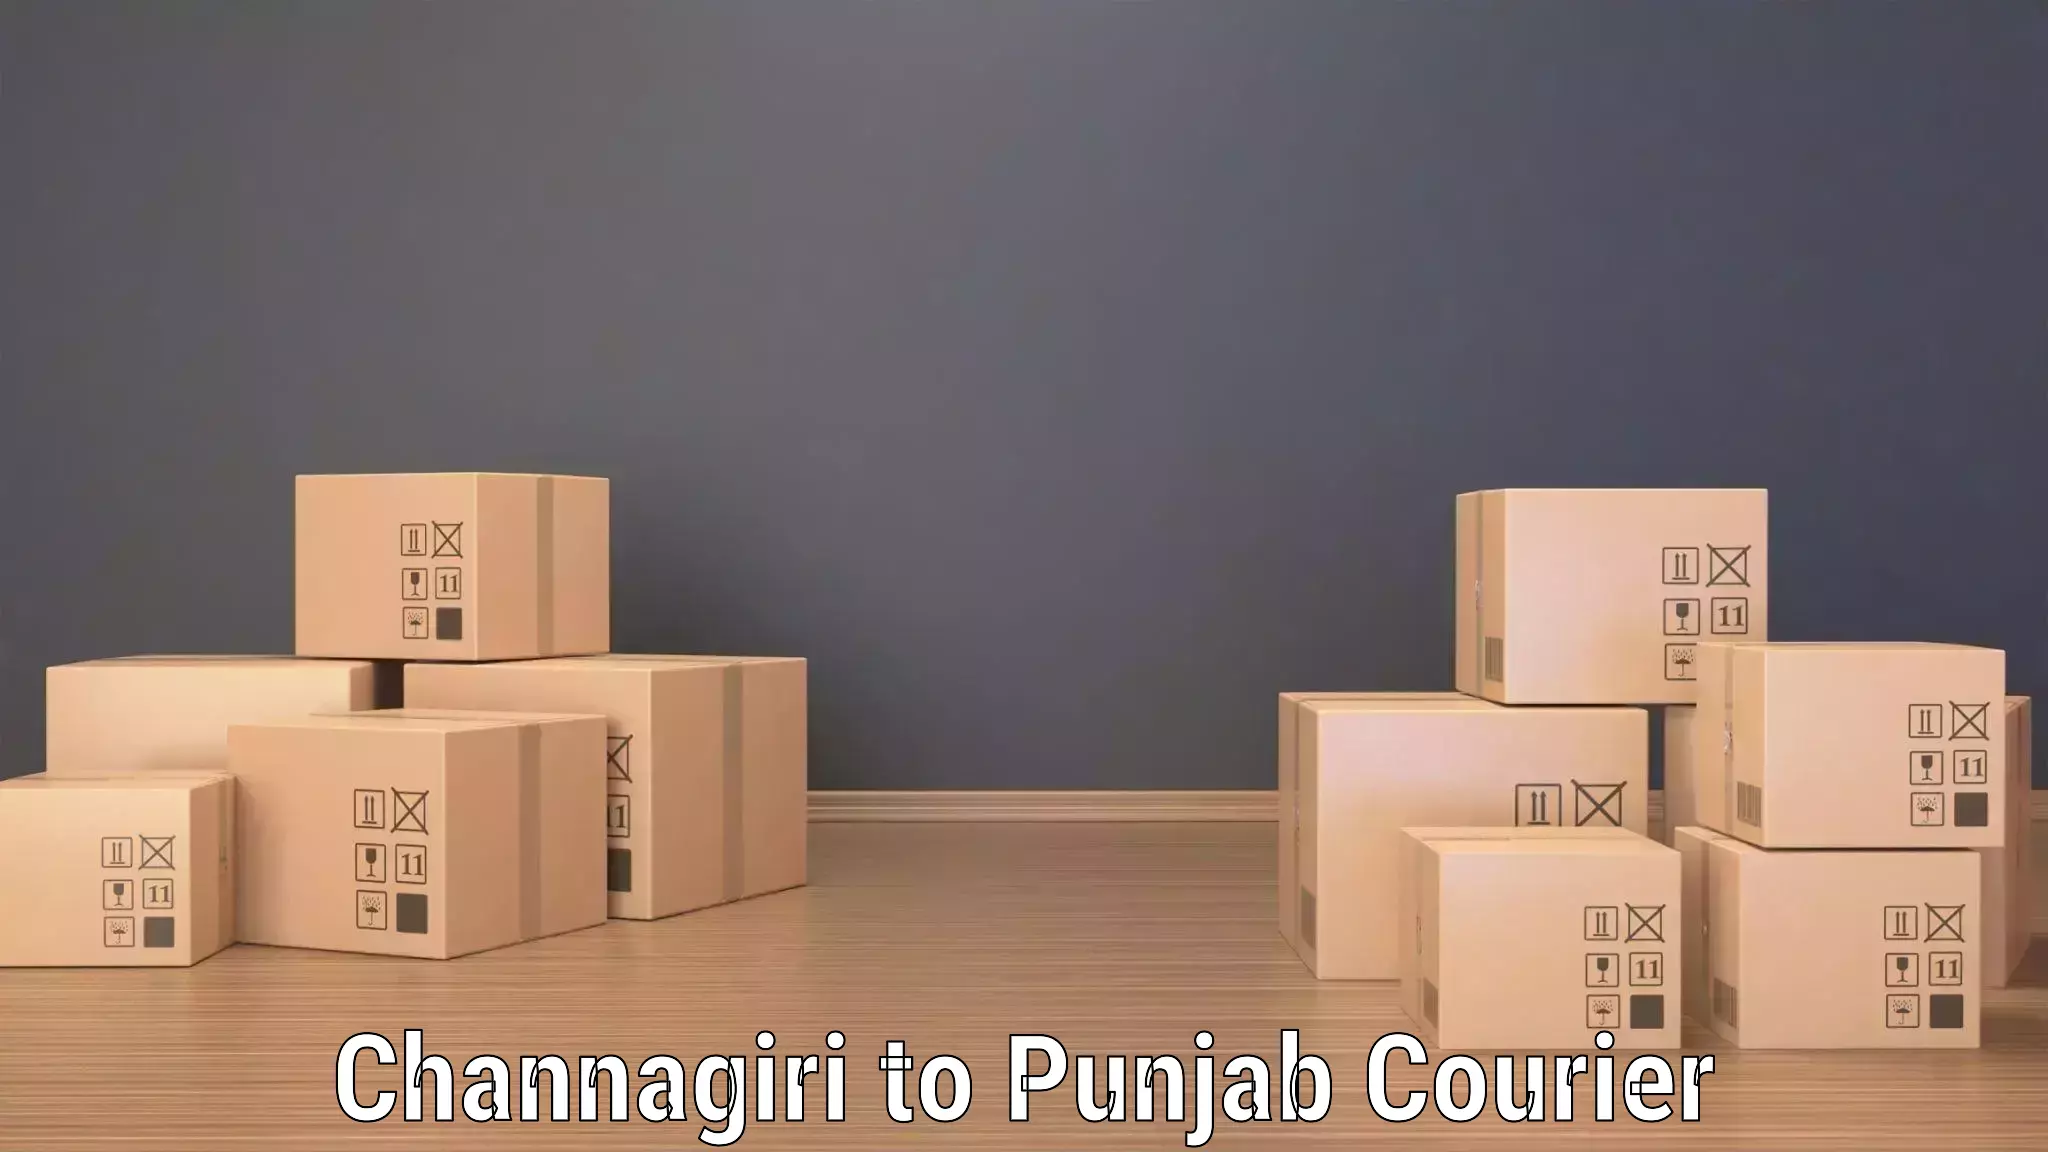 End-to-end delivery Channagiri to Punjab